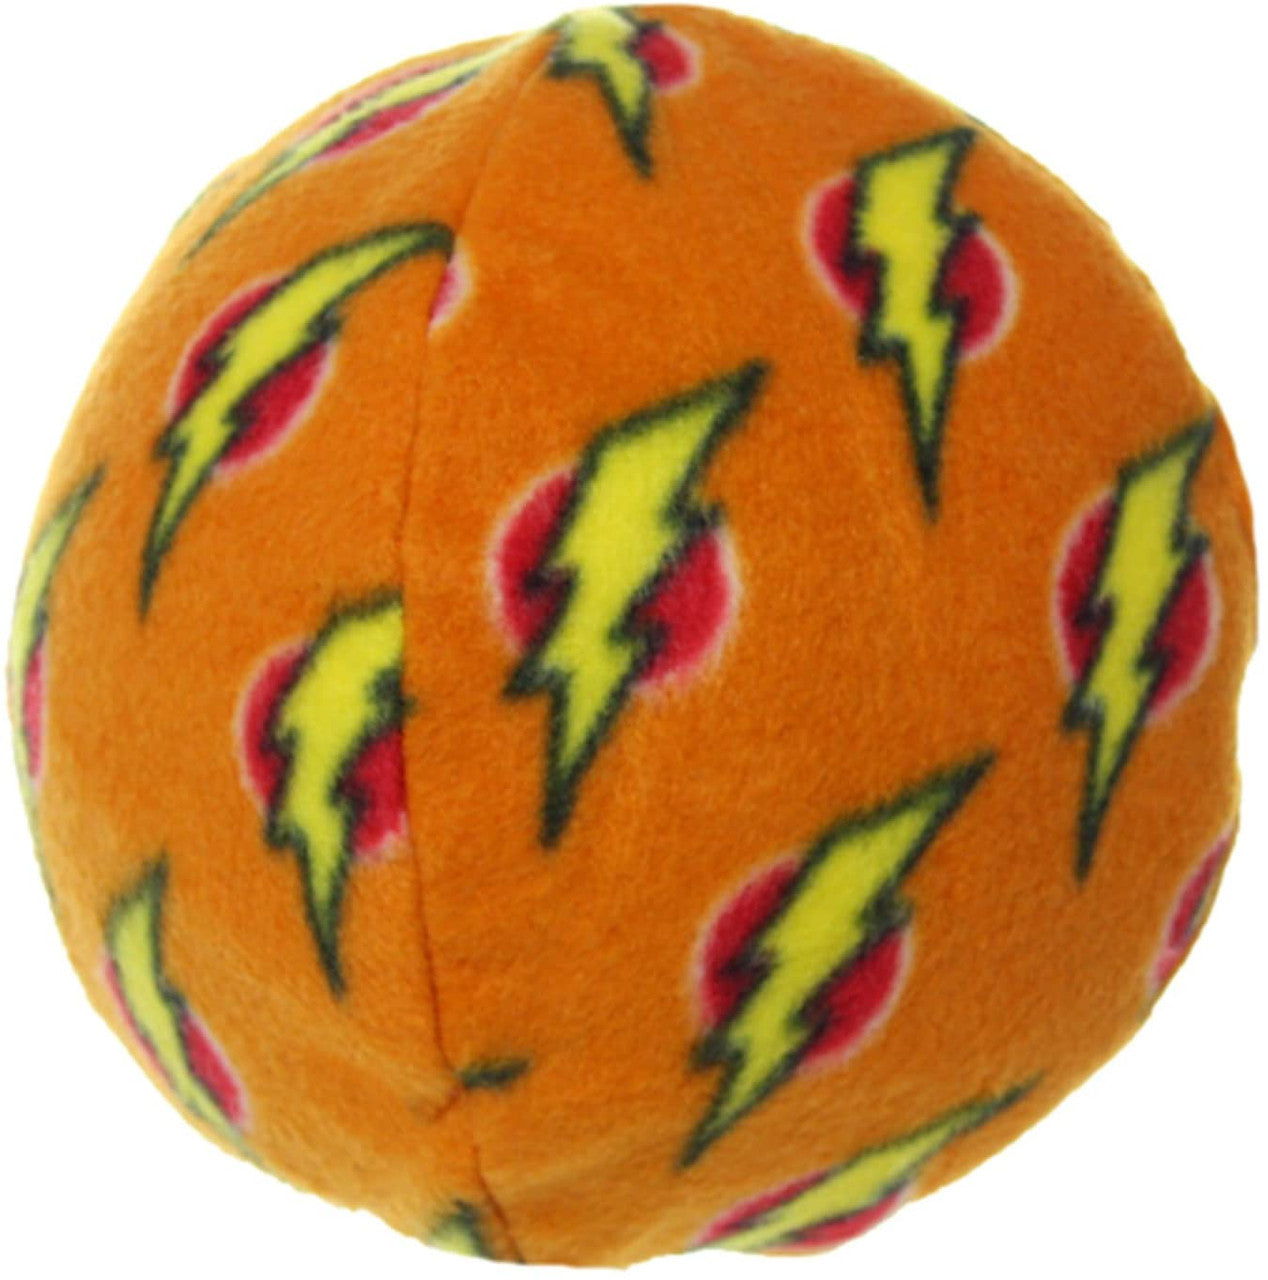 Mighty Ball Orng Lg Dog Toy 180181904318